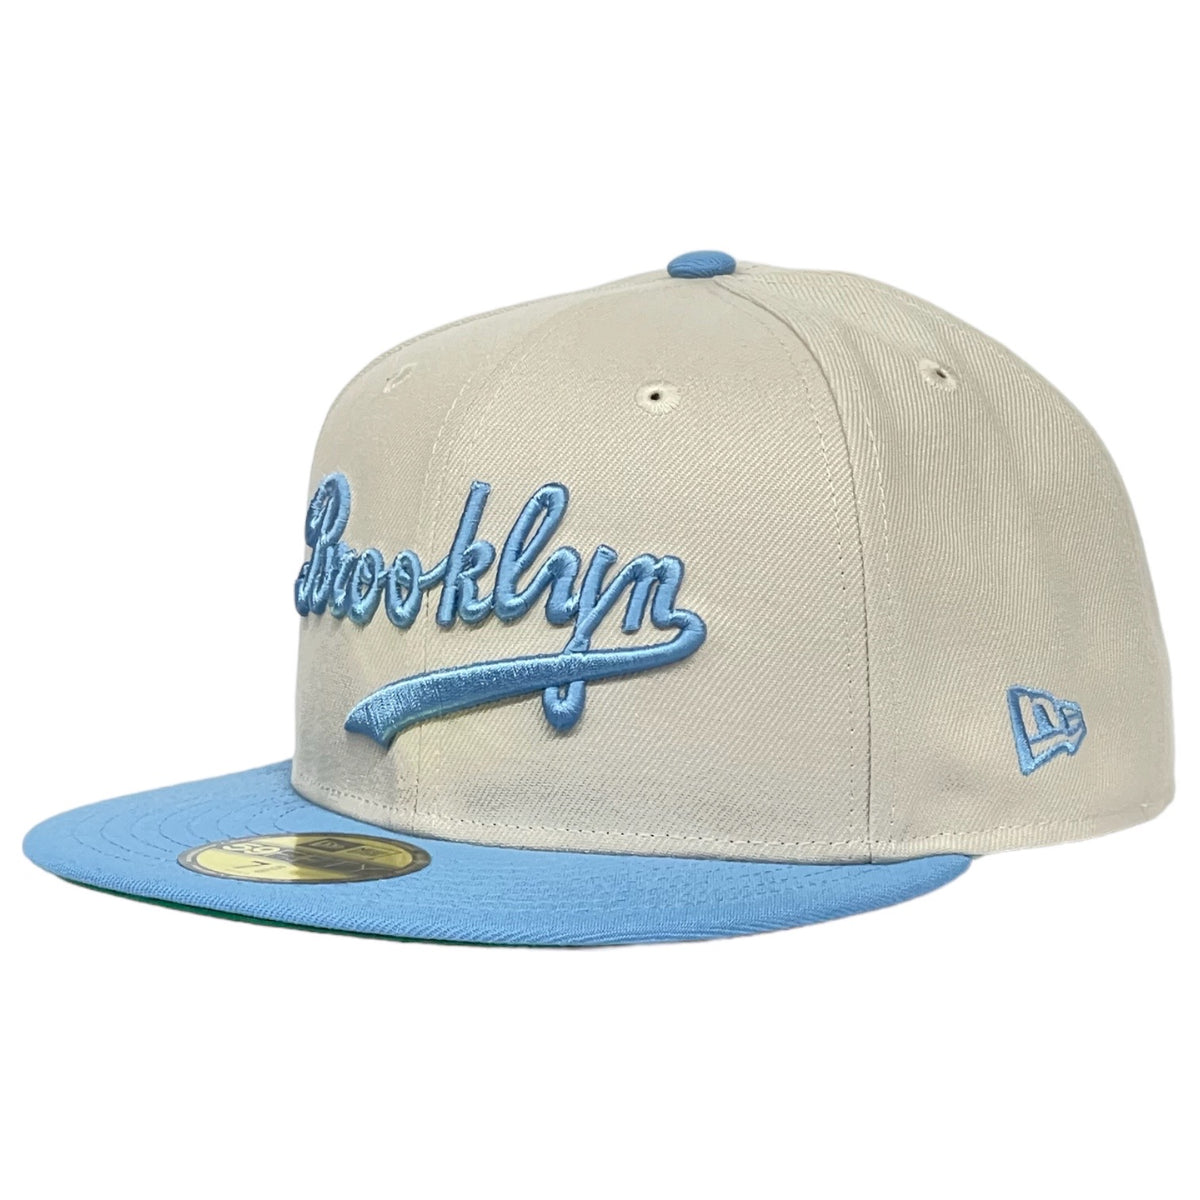 Brooklyn Dodgers Sky Royal Jackie Robinson 75 Years New Era 59FIFTY Fitted  Hat